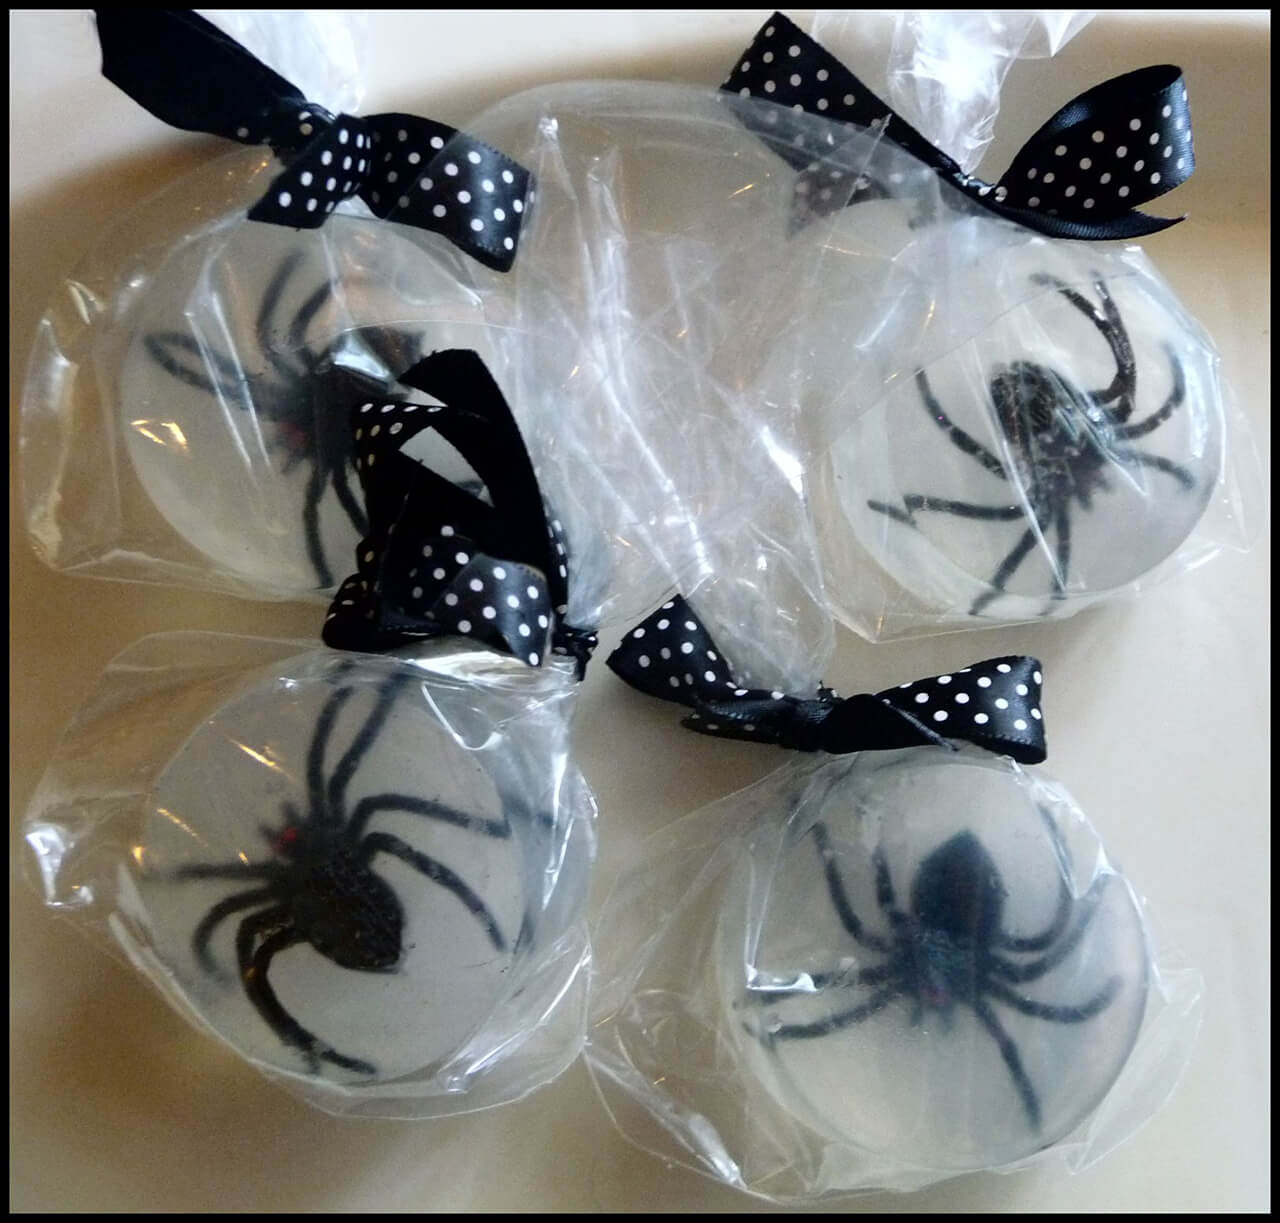 Melt-and-pour Spider Soaps | Fun & Creative DIY Halloween Crafts for Kids